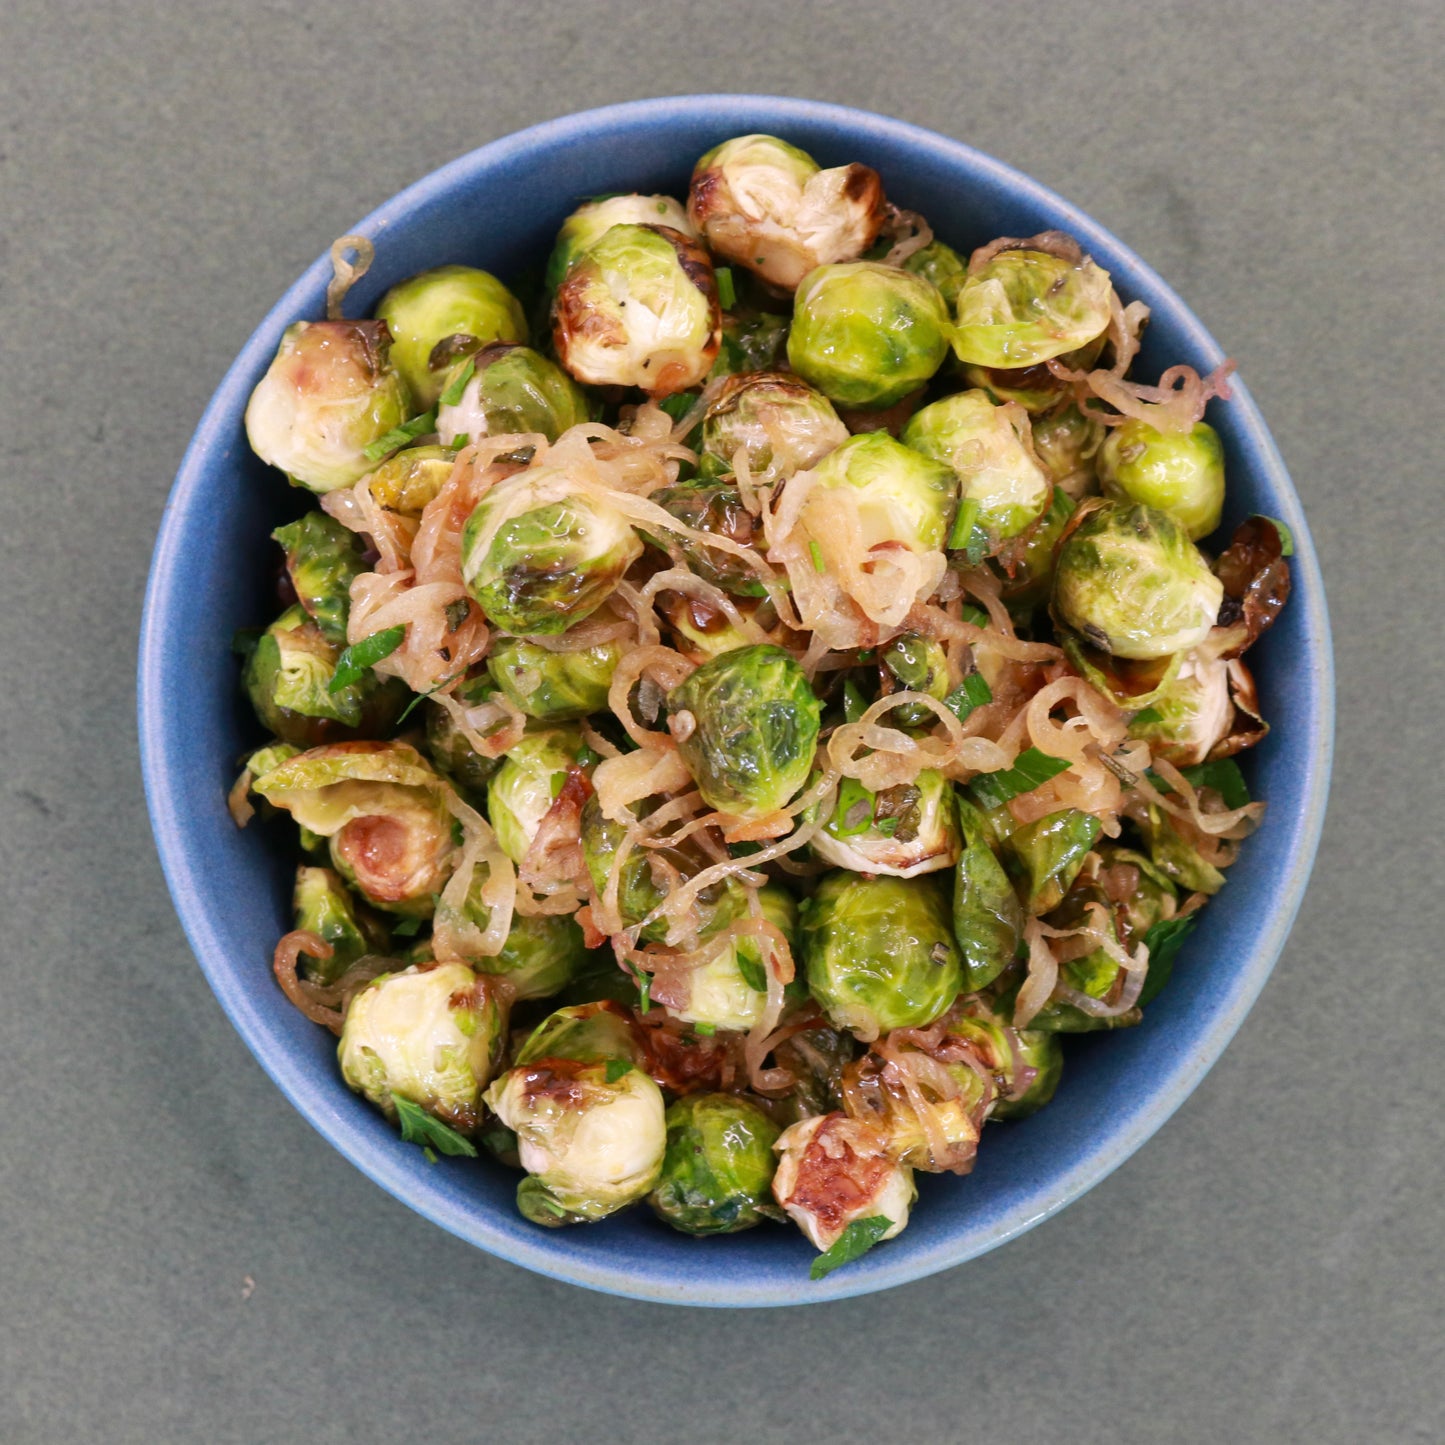 Shallot Roasted Brussels Sprouts